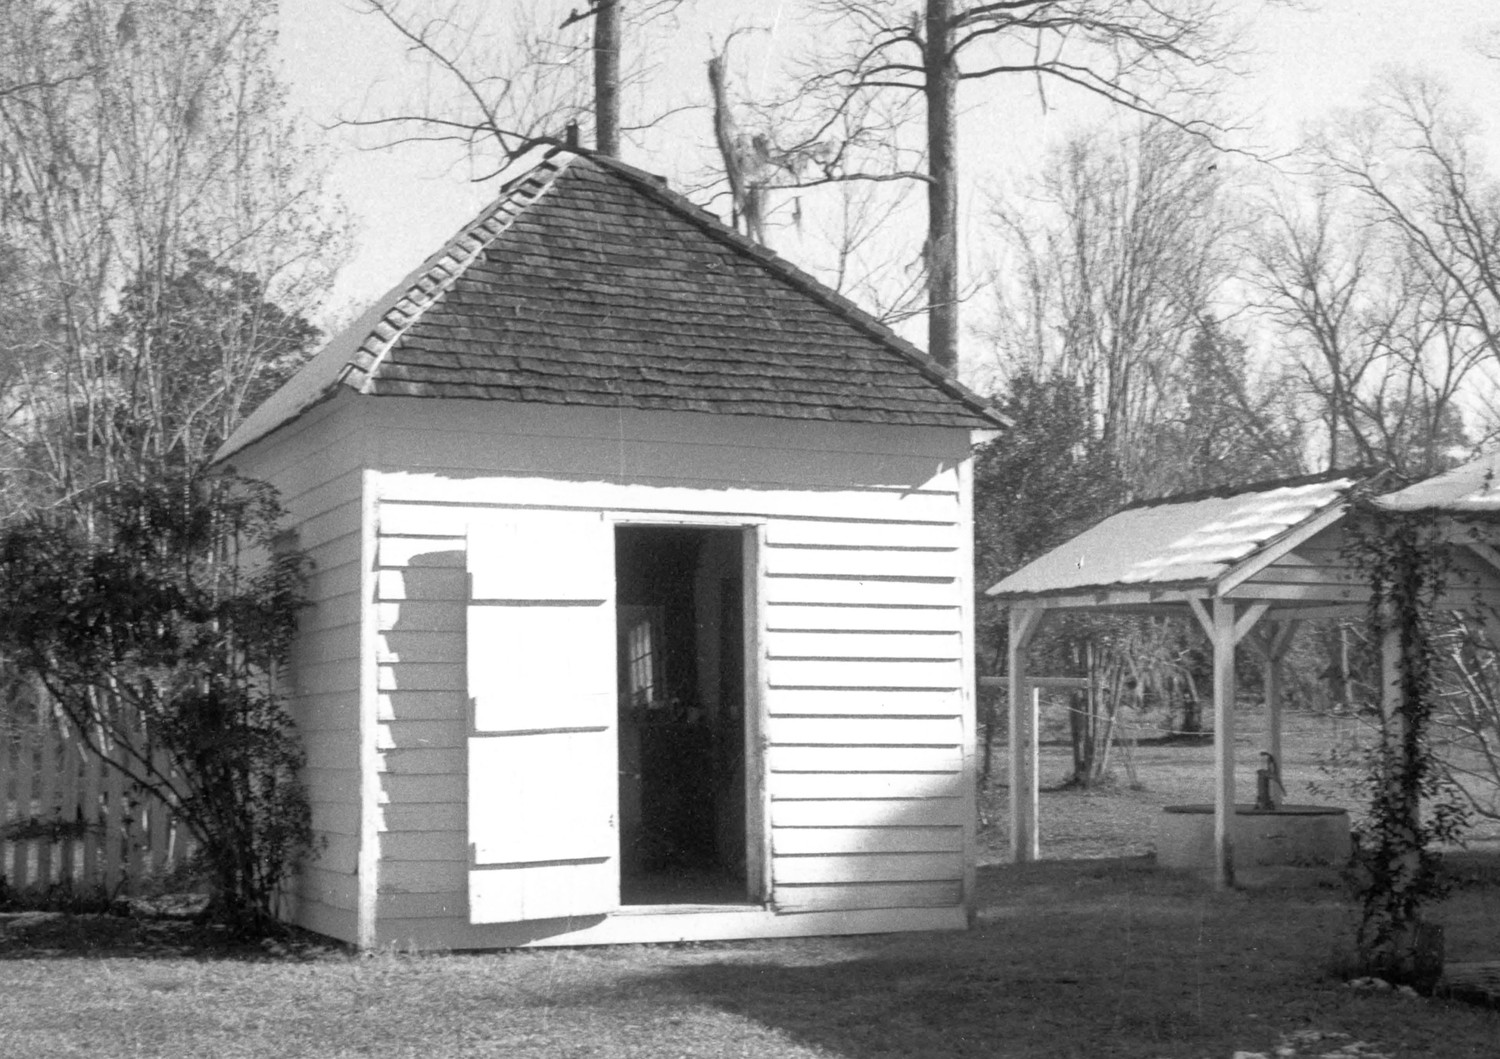 Cottage Plantation, St. Francisville Louisiana Milk House: In this building milk from the plantation dairy was processed into milk, cream, butter etc (1973)